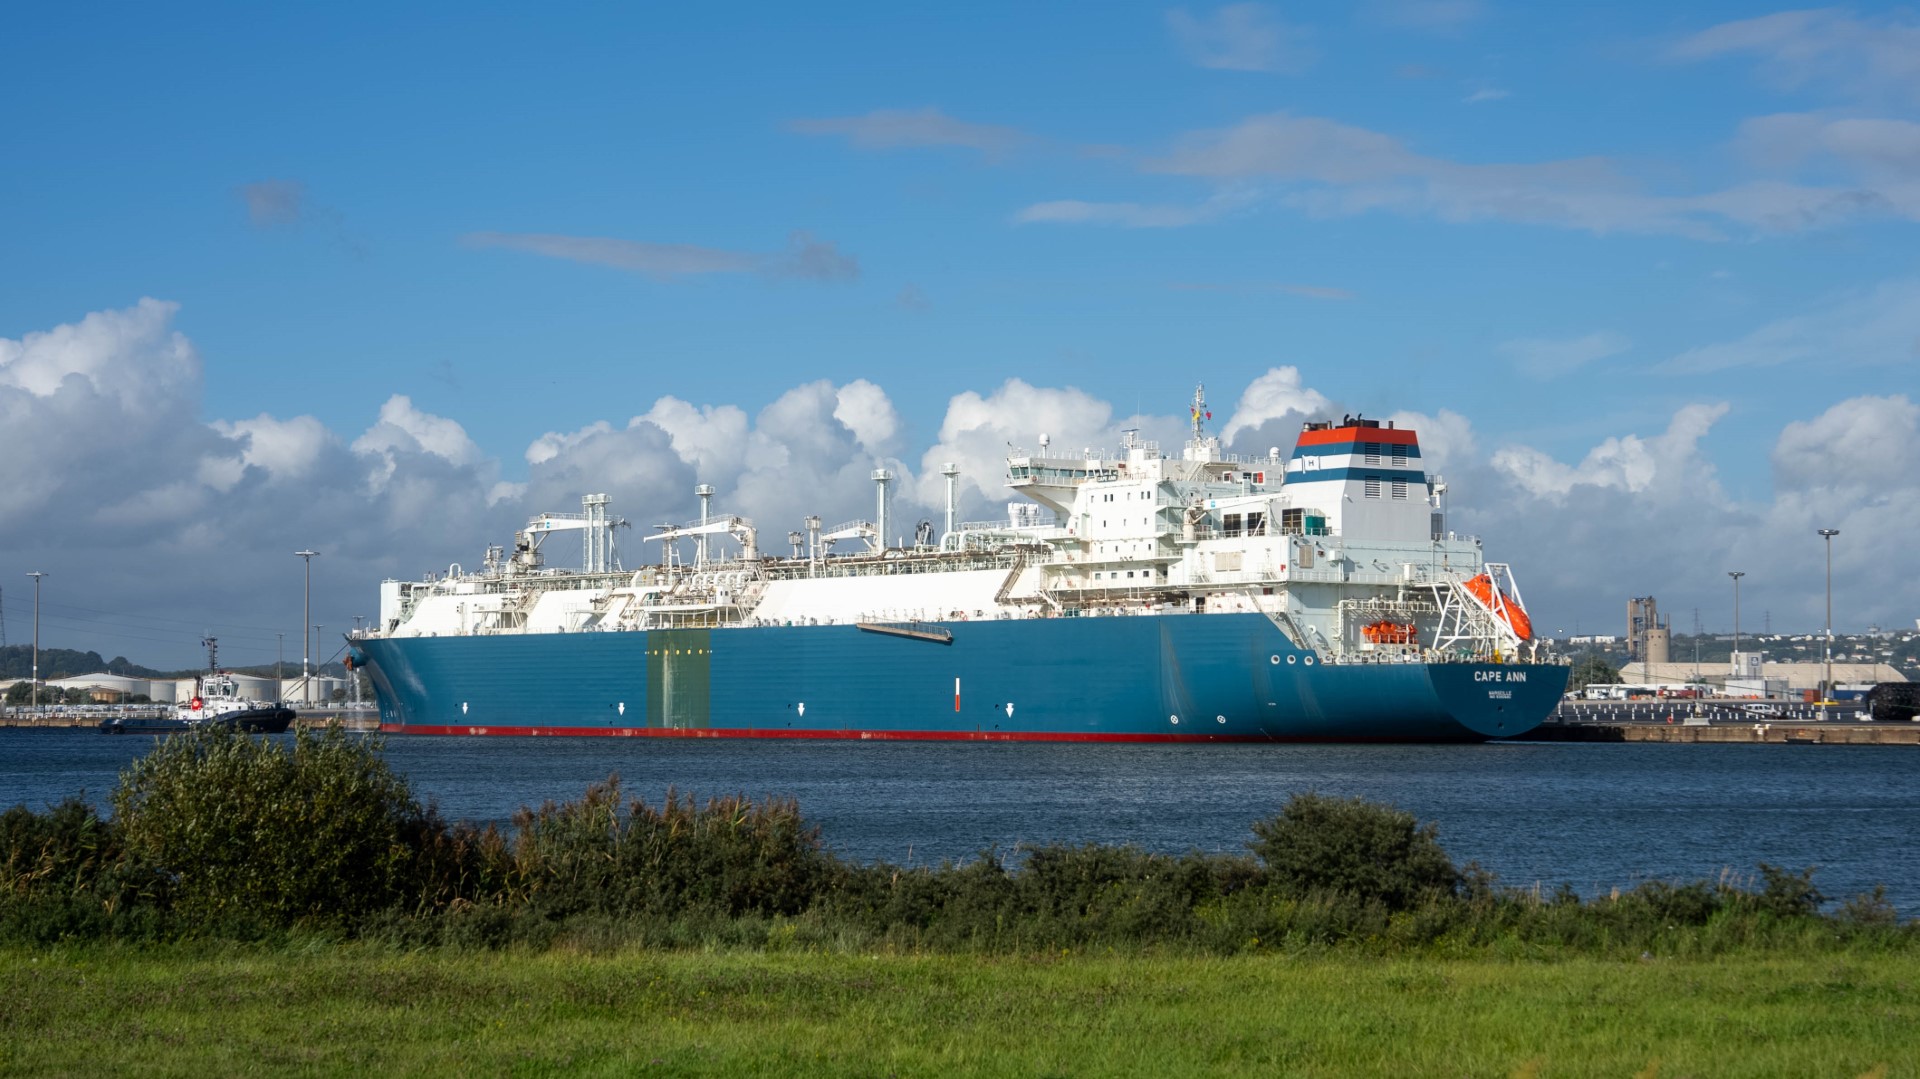 TotalEnergies says average LNG price down in Q3